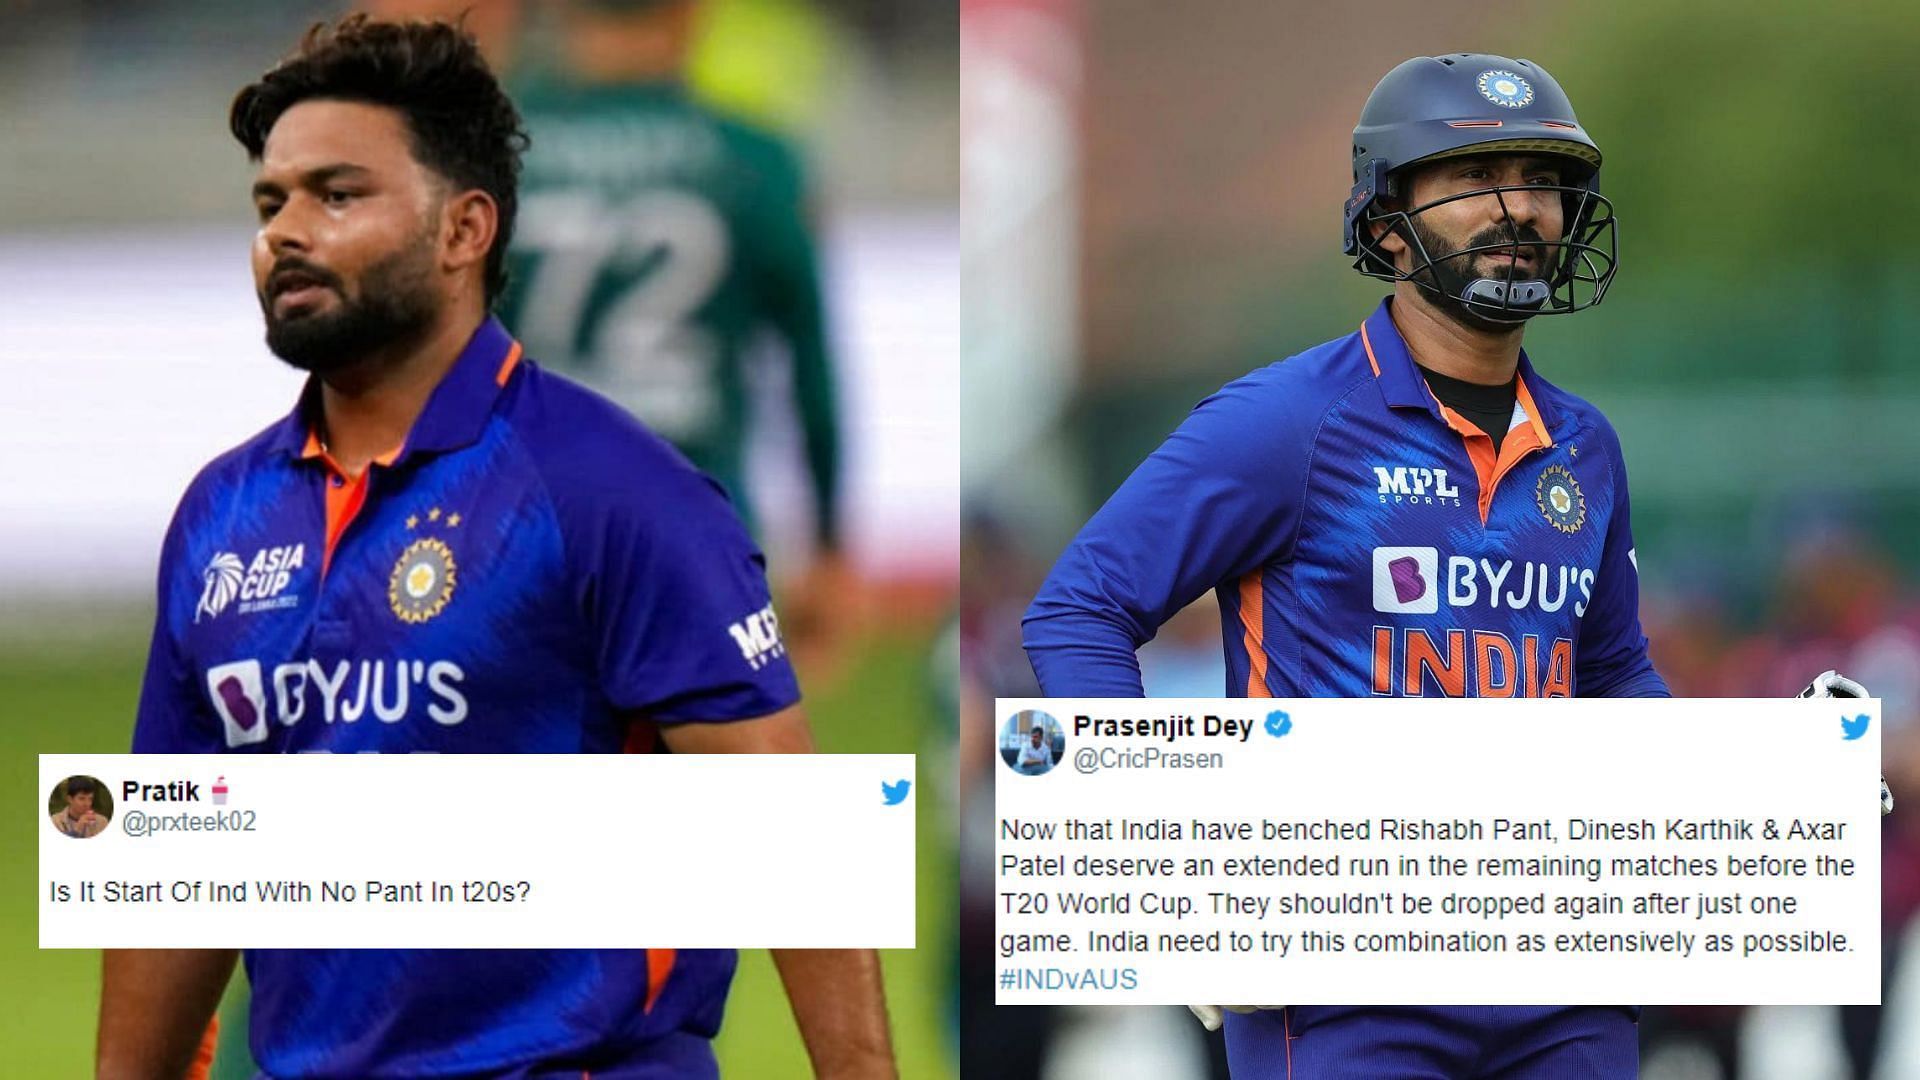 Fans had mixed reactions about Rishabh Pant being benched for the first T20I.